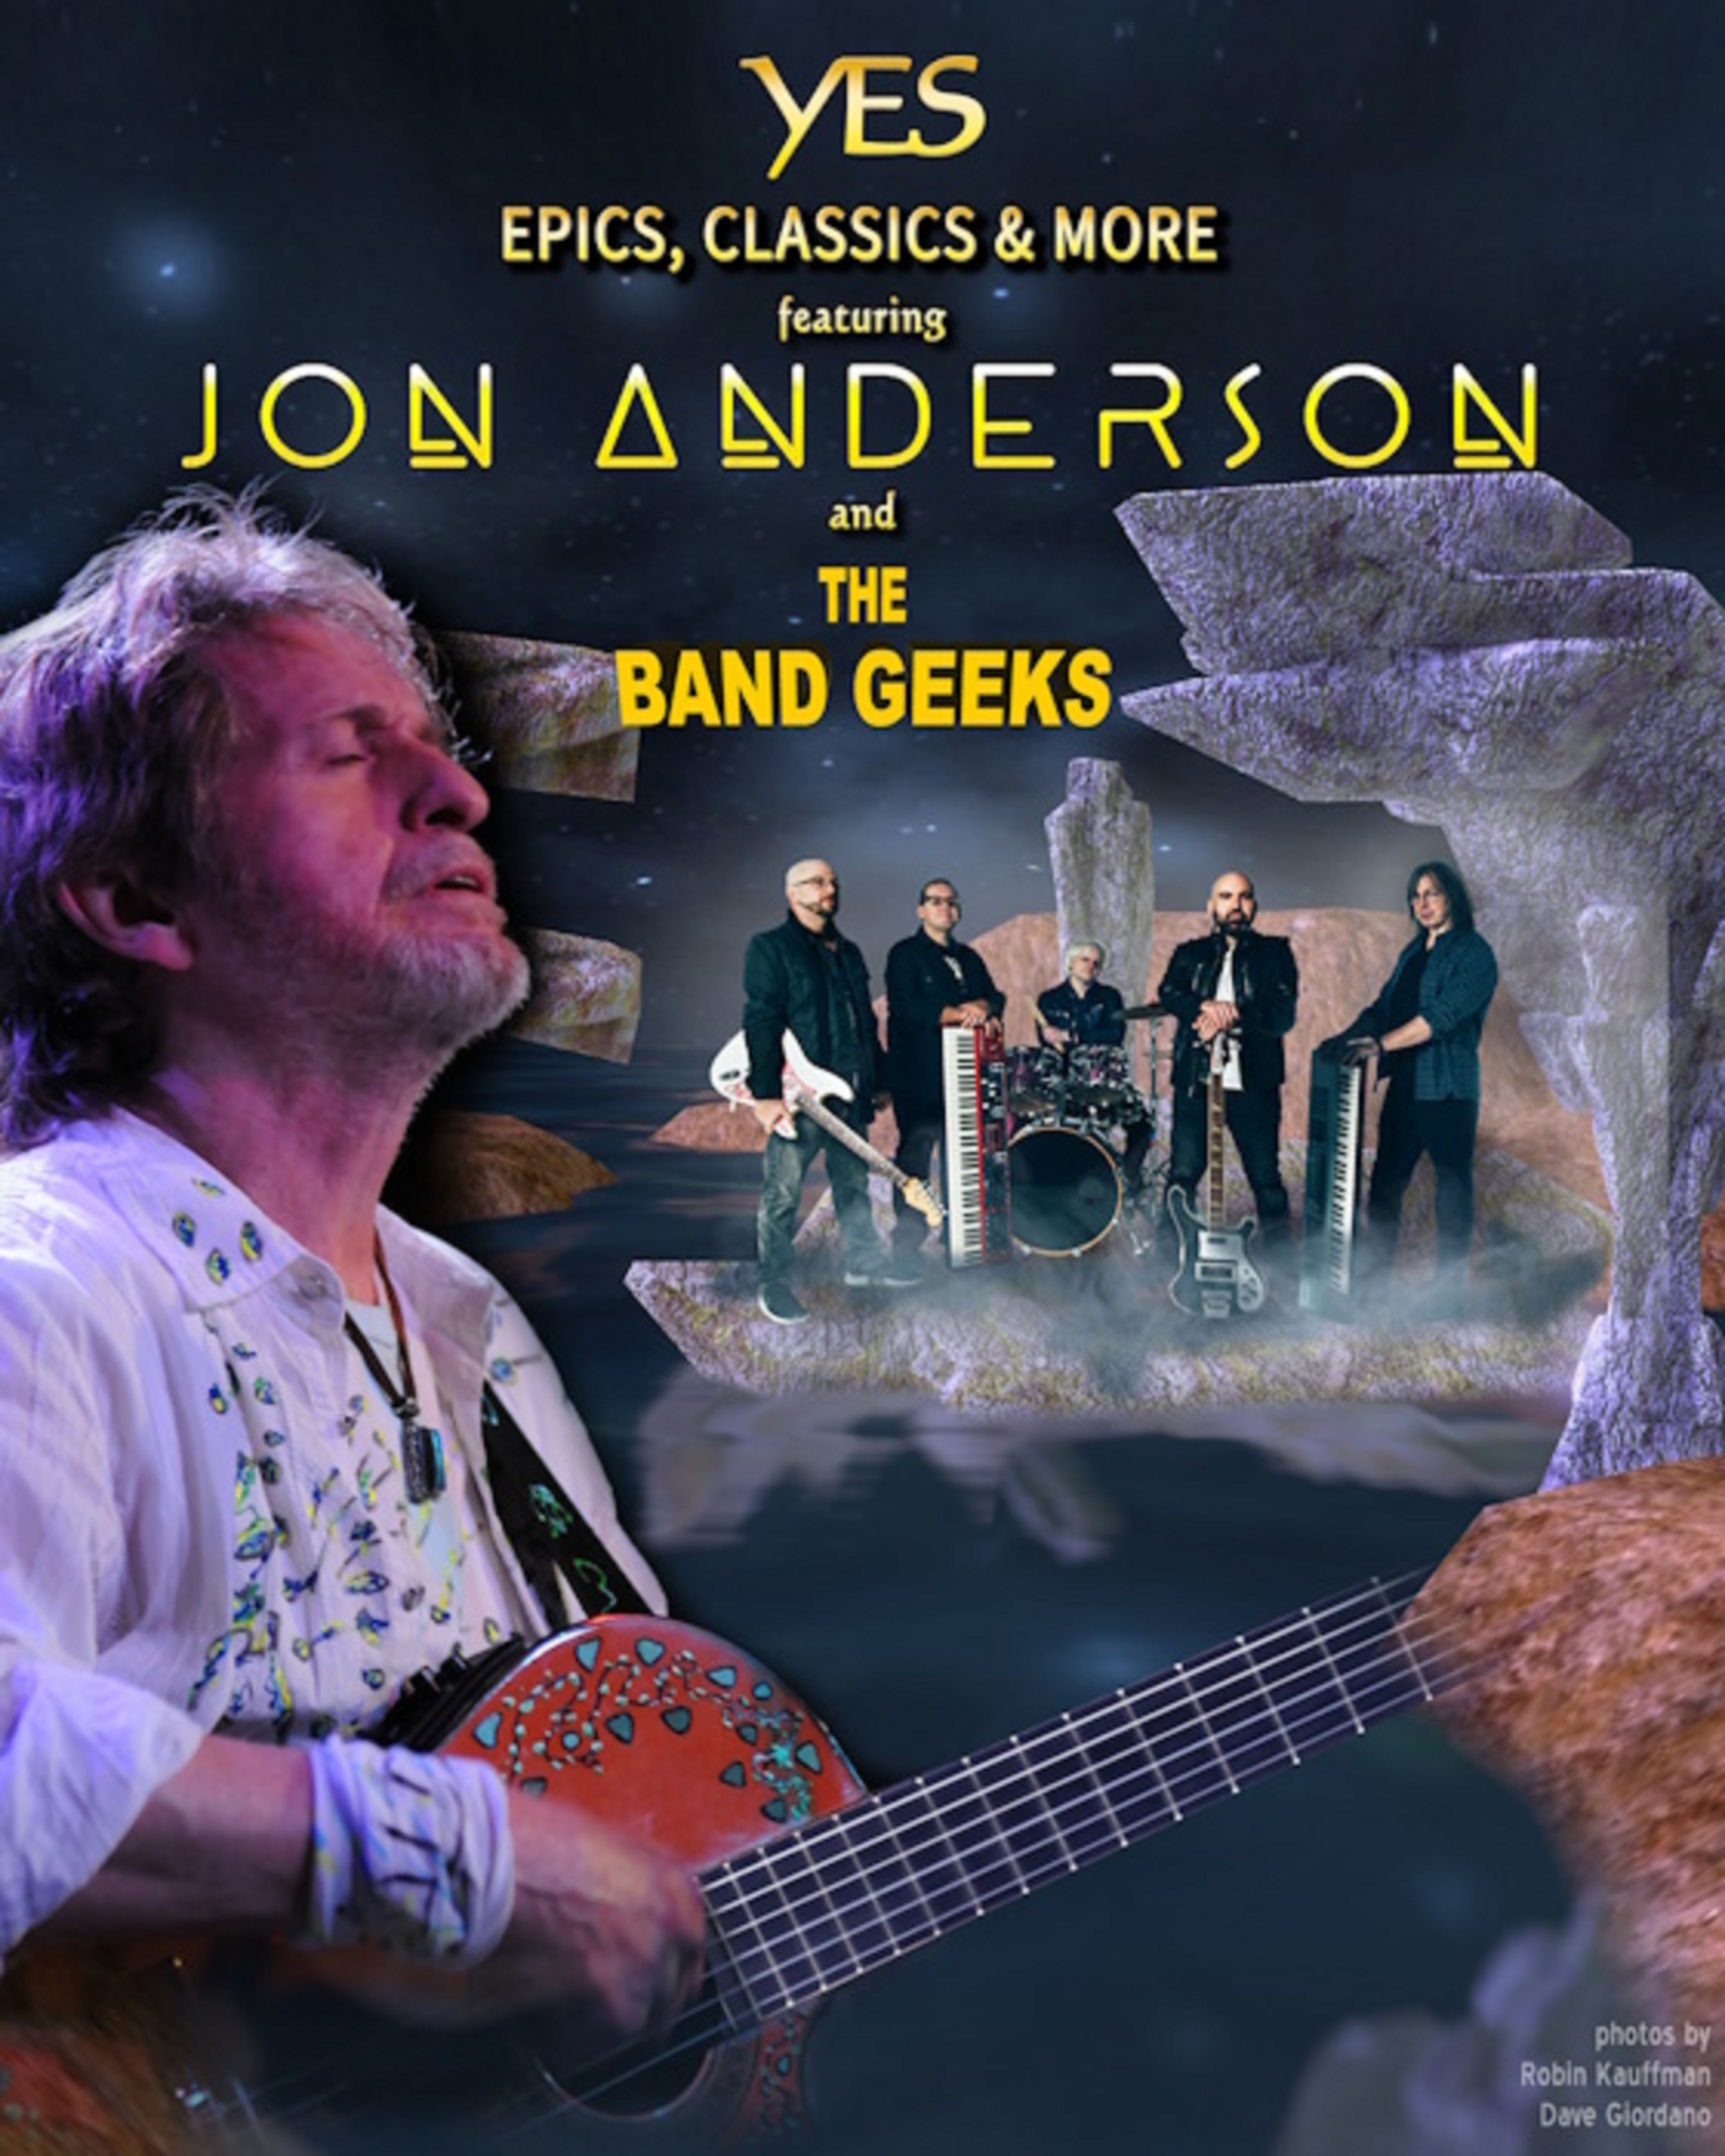 YES Legend Jon Anderson and The Band Geeks Release New Album “TRUE” on August 23rd, Debut Single and Video Premiere Mid-June!